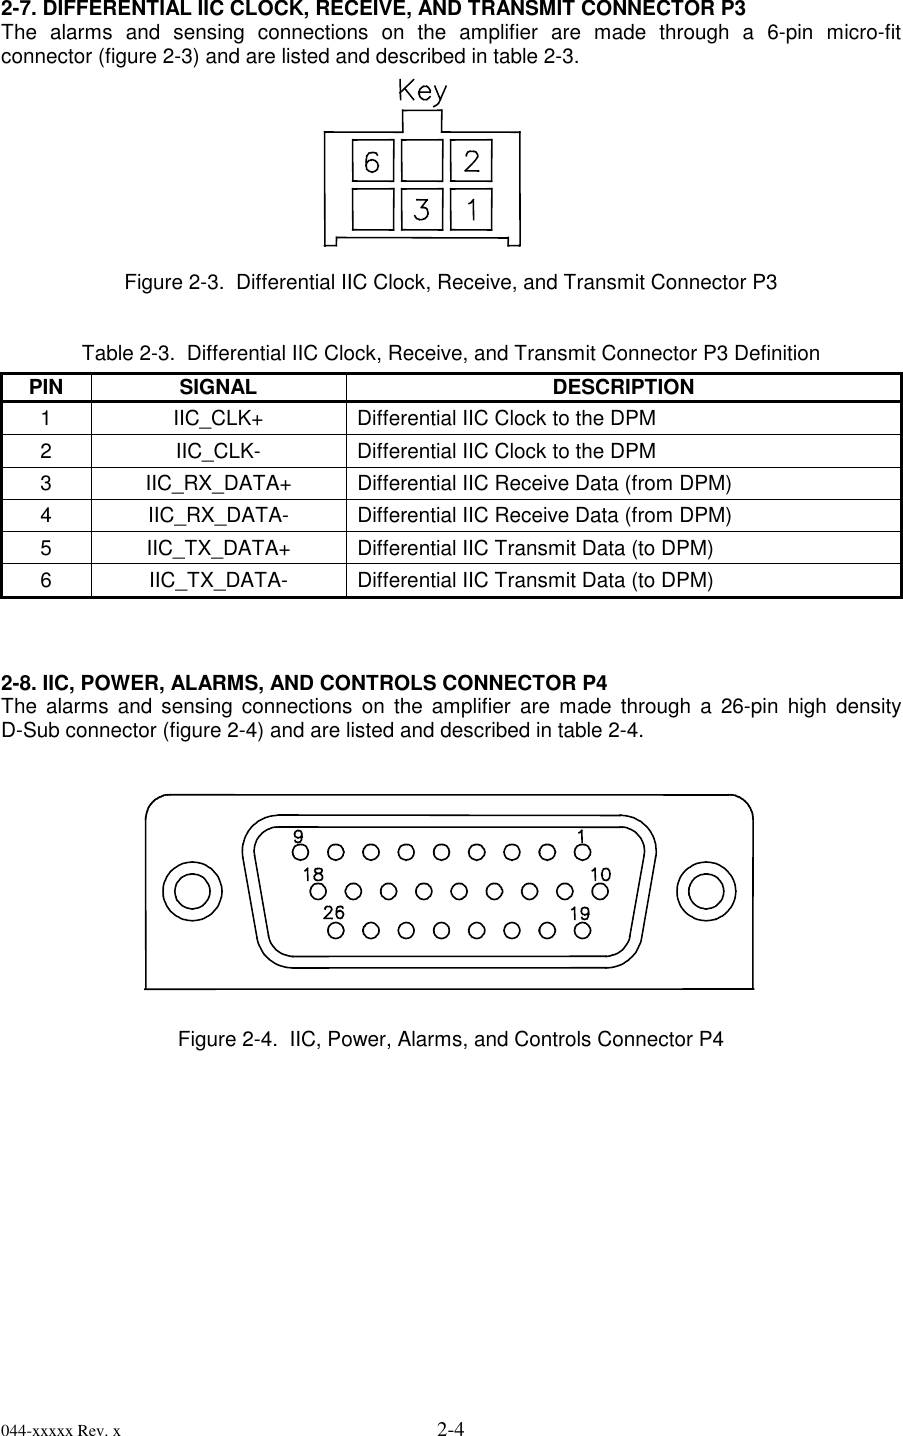 044-xxxxx Rev. x 2-42-7. DIFFERENTIAL IIC CLOCK, RECEIVE, AND TRANSMIT CONNECTOR P3The alarms and sensing connections on the amplifier are made through a 6-pin micro-fitconnector (figure 2-3) and are listed and described in table 2-3.Figure 2-3.  Differential IIC Clock, Receive, and Transmit Connector P3Table 2-3.  Differential IIC Clock, Receive, and Transmit Connector P3 DefinitionPIN SIGNAL DESCRIPTION1 IIC_CLK+ Differential IIC Clock to the DPM2 IIC_CLK- Differential IIC Clock to the DPM3 IIC_RX_DATA+ Differential IIC Receive Data (from DPM)4 IIC_RX_DATA- Differential IIC Receive Data (from DPM)5 IIC_TX_DATA+ Differential IIC Transmit Data (to DPM)6 IIC_TX_DATA- Differential IIC Transmit Data (to DPM)2-8. IIC, POWER, ALARMS, AND CONTROLS CONNECTOR P4The alarms and sensing connections on the amplifier are made through a 26-pin high densityD-Sub connector (figure 2-4) and are listed and described in table 2-4.Figure 2-4.  IIC, Power, Alarms, and Controls Connector P4